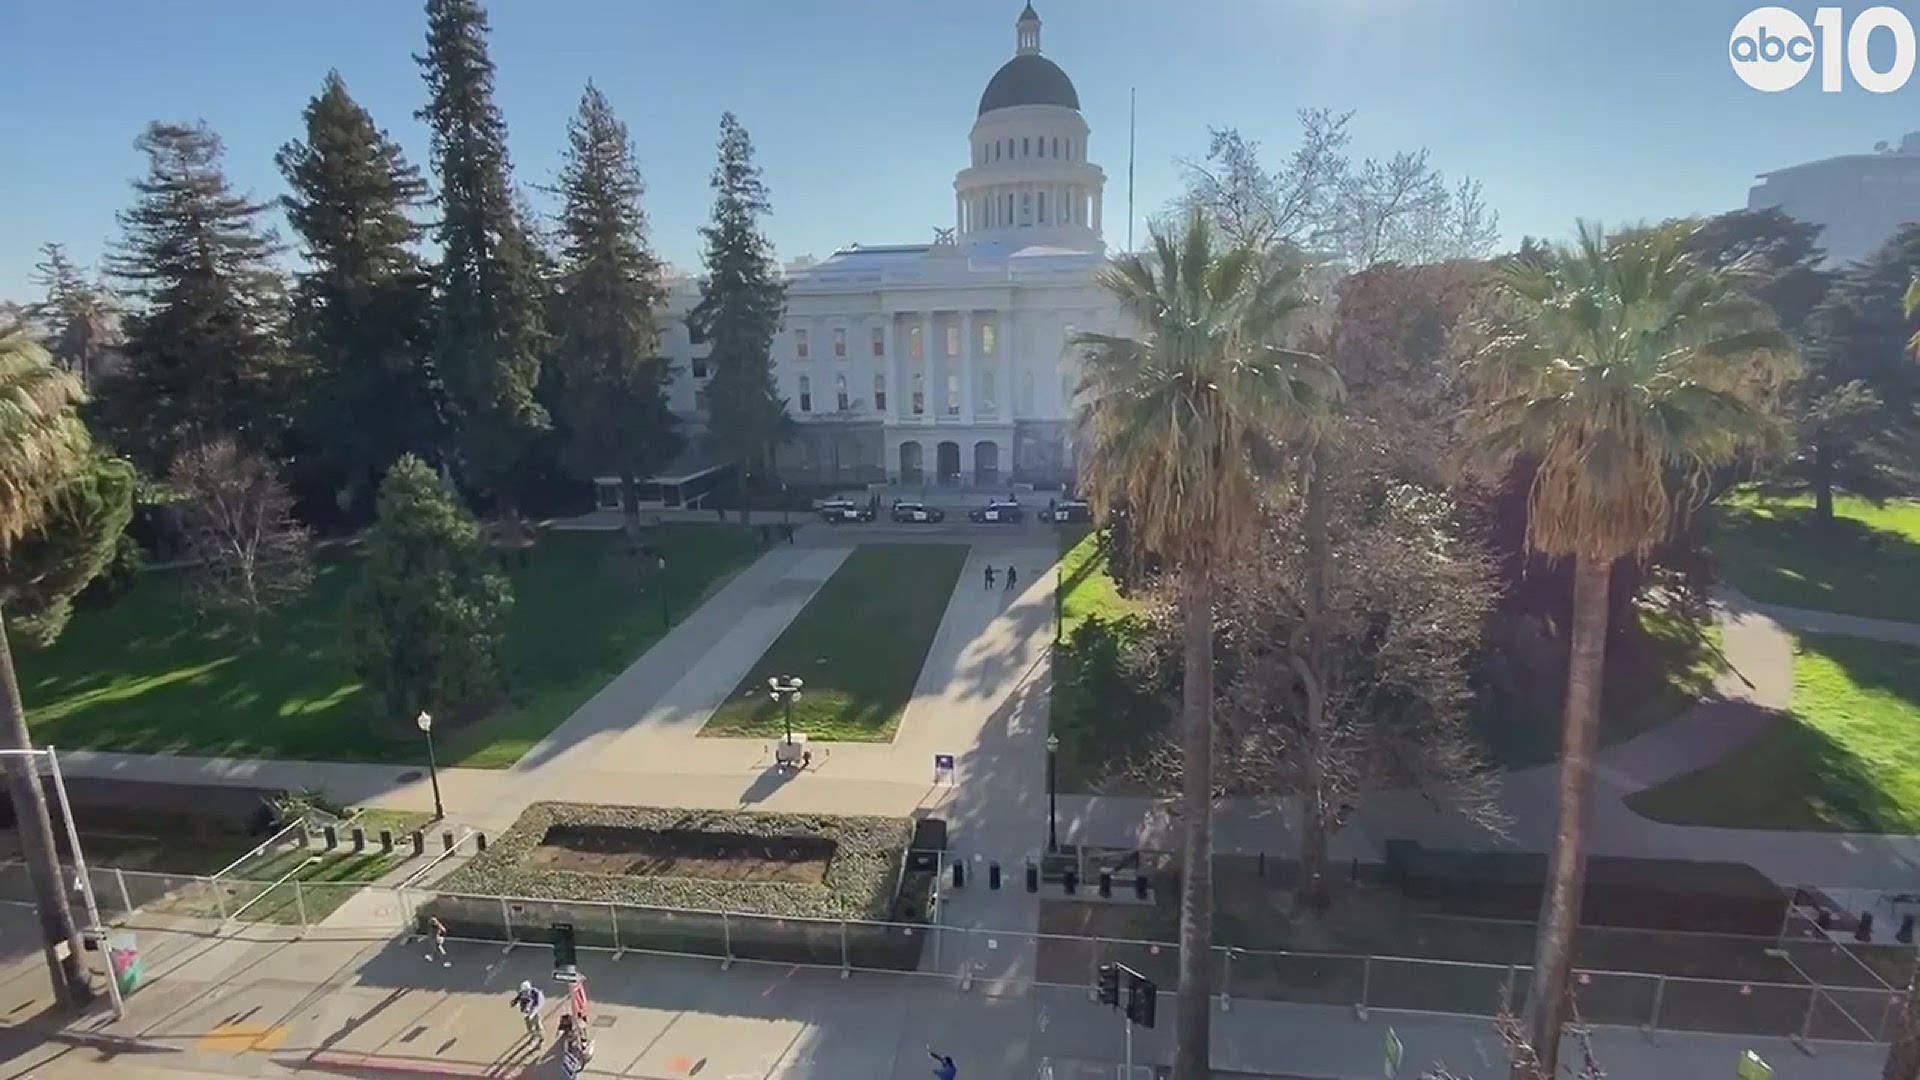 ABC10 reporter Monica Coleman describes the police presence and atmosphere at the State Capitol in Sacramento.